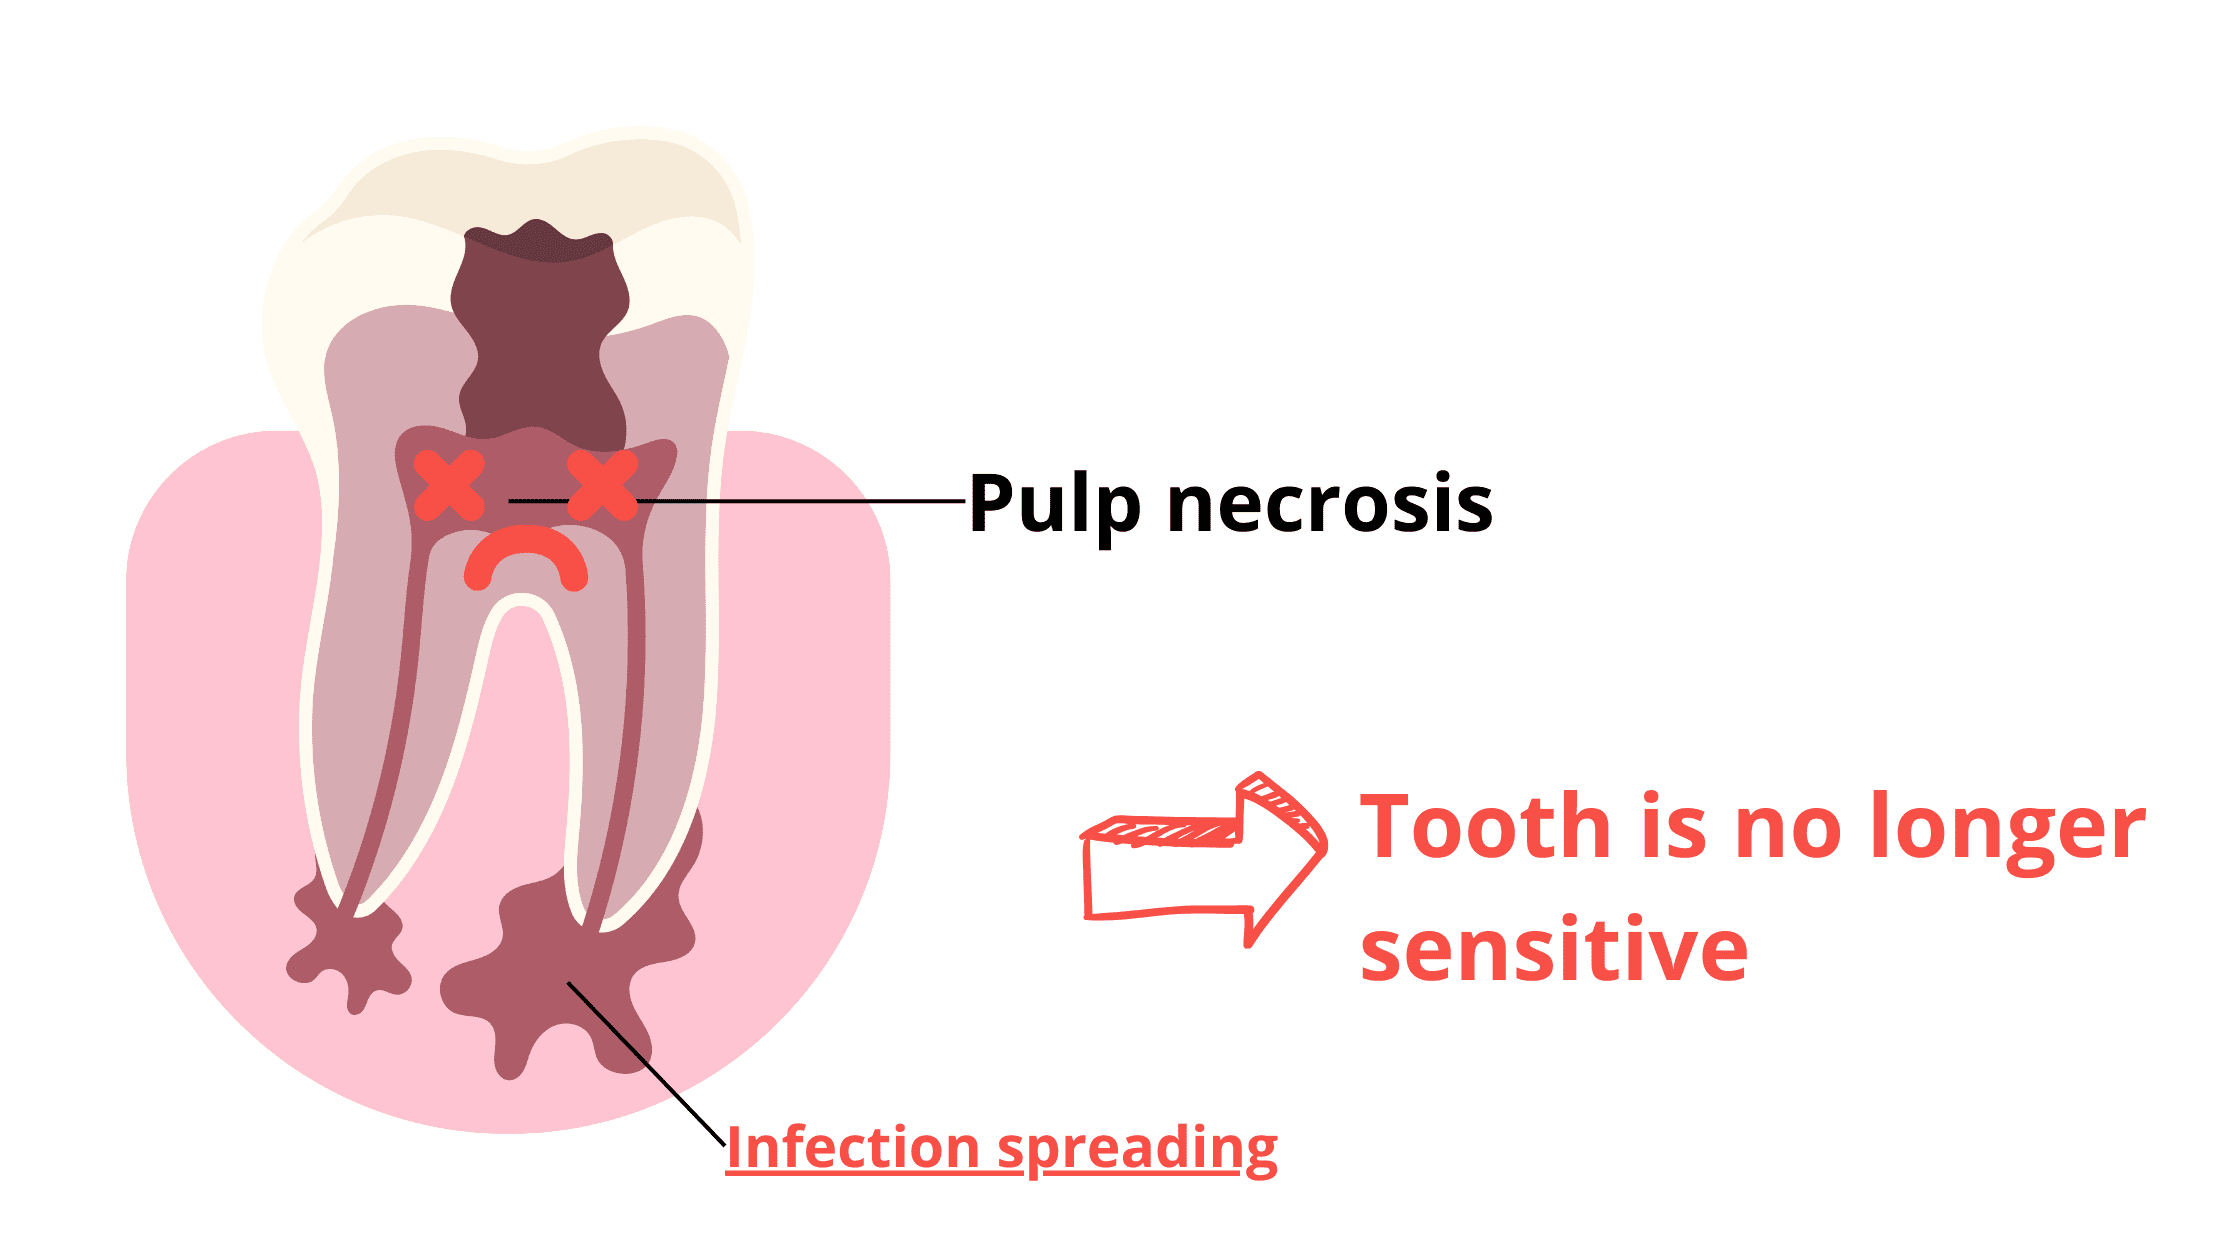 Pulpal necrosis leads to tooth insensitivity.